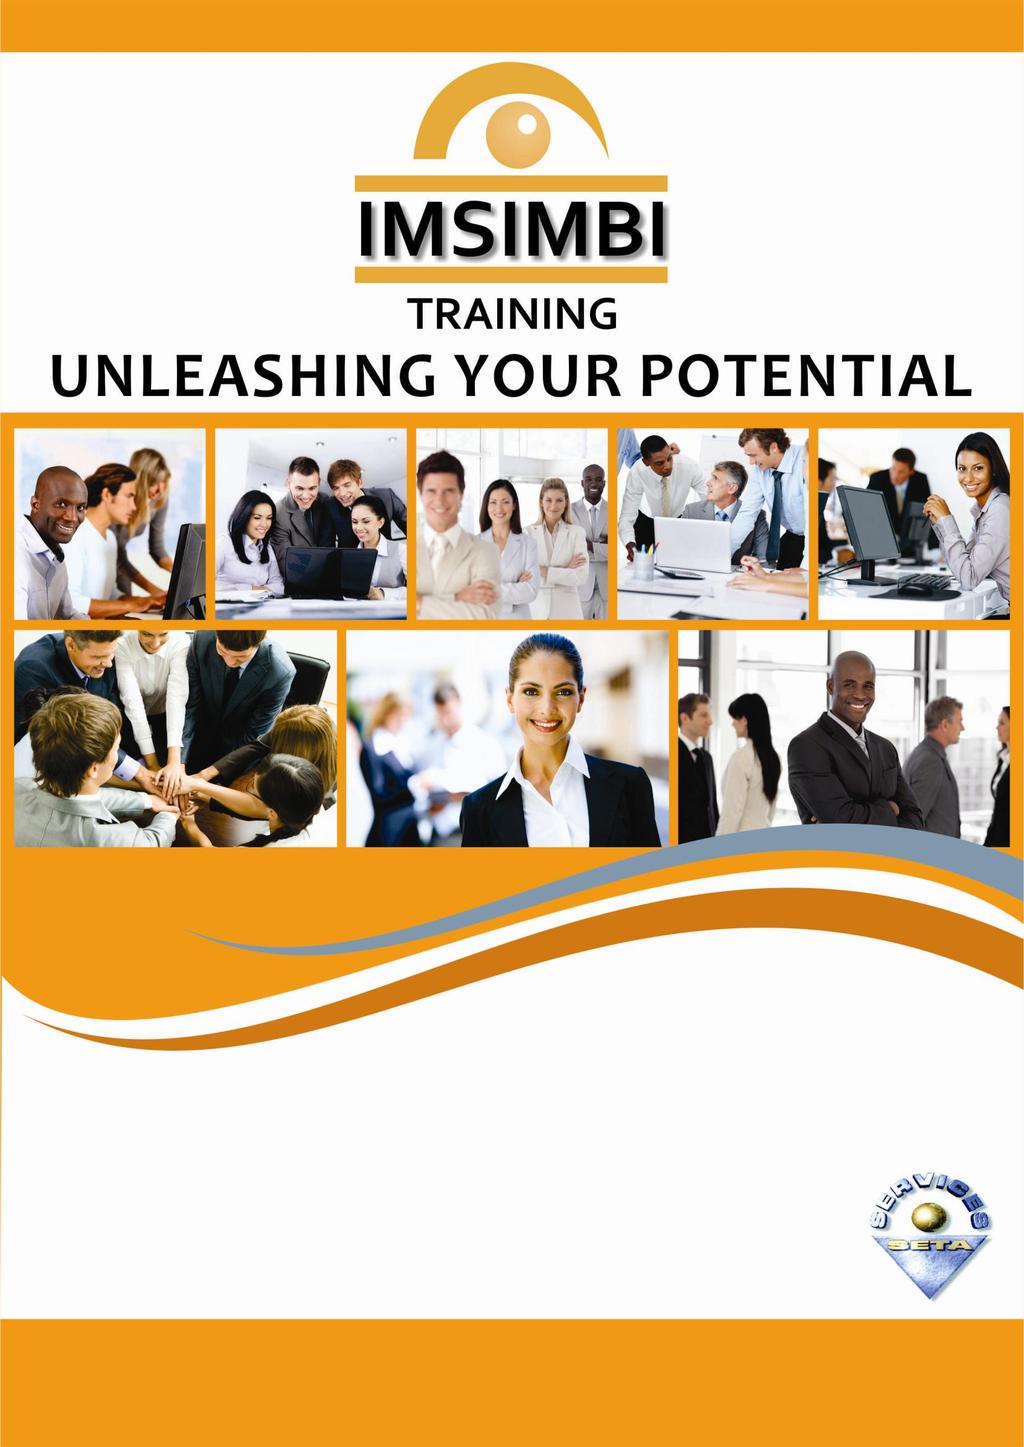 Imsimbi Training proudly presents Mentoring & Coaching 3 DAYS Imsimbi Training is a fully accredited training provider with the Services Seta, number 2147, as well as a Level 2 Contributor BBBEE